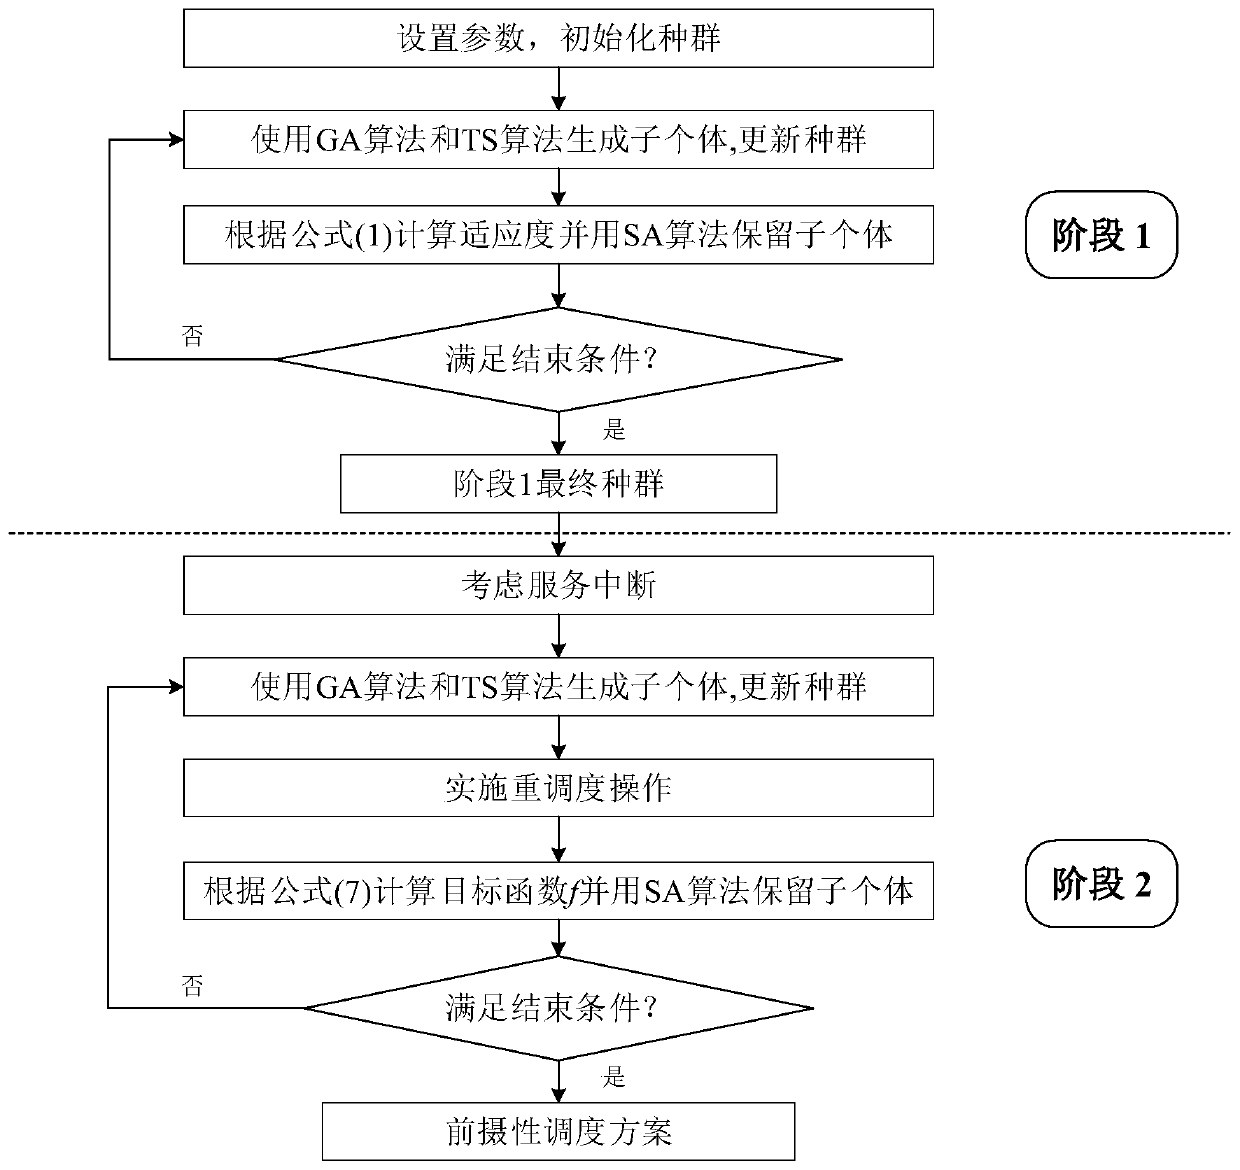 Flexible multi-task proactive scheduling optimization method in cloud manufacturing environment